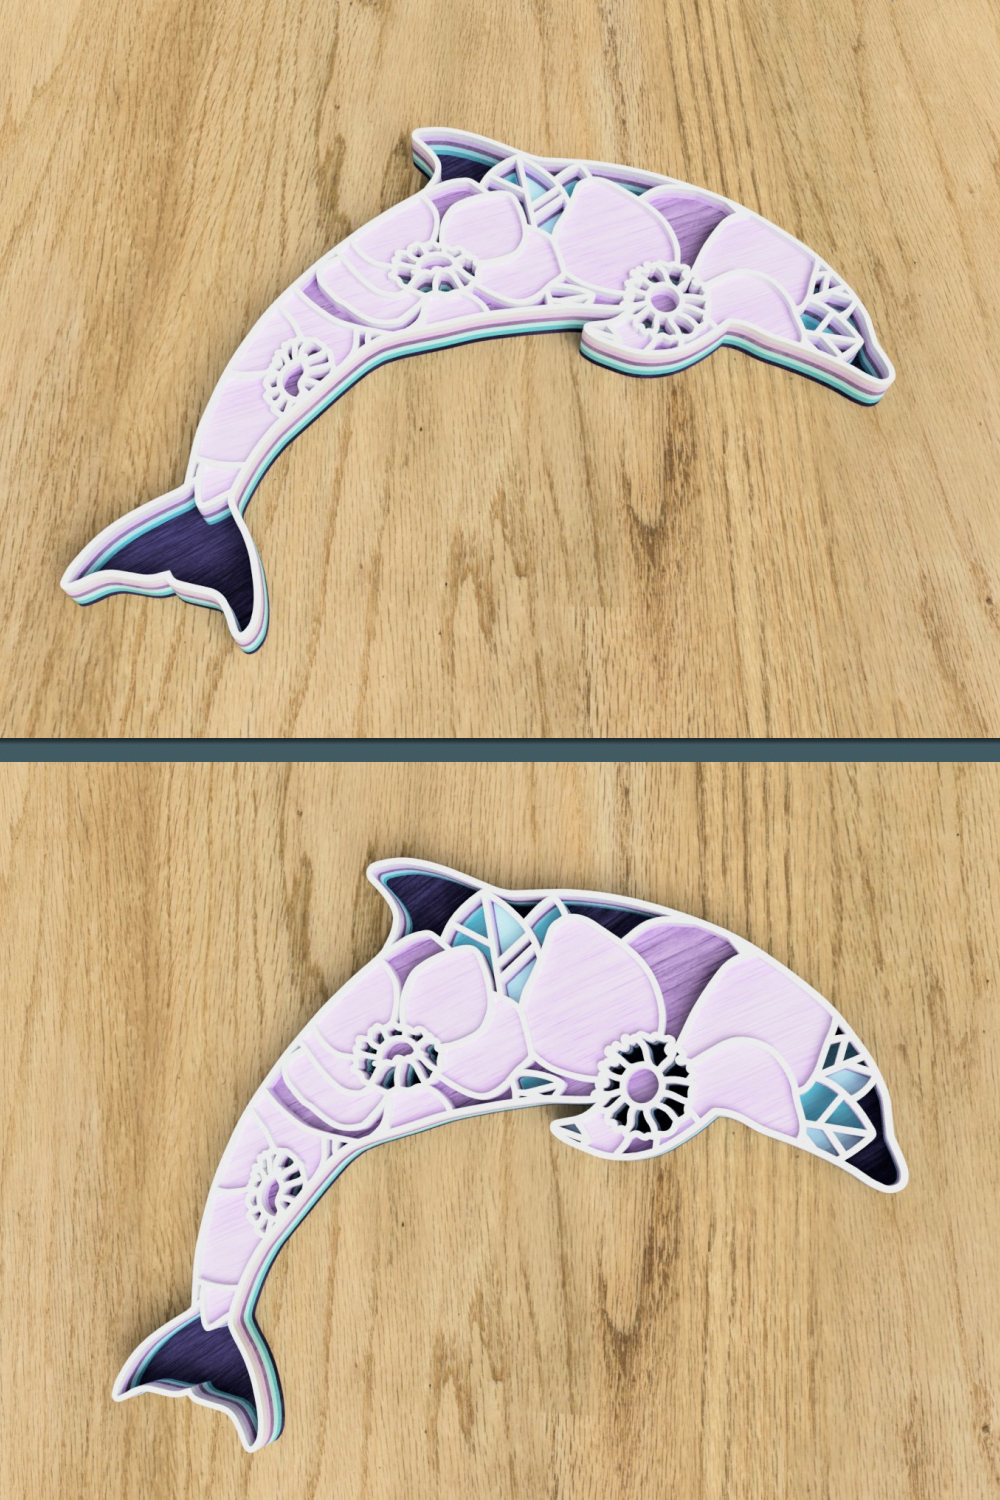 Two pictures of a dolphin on a wooden surface.